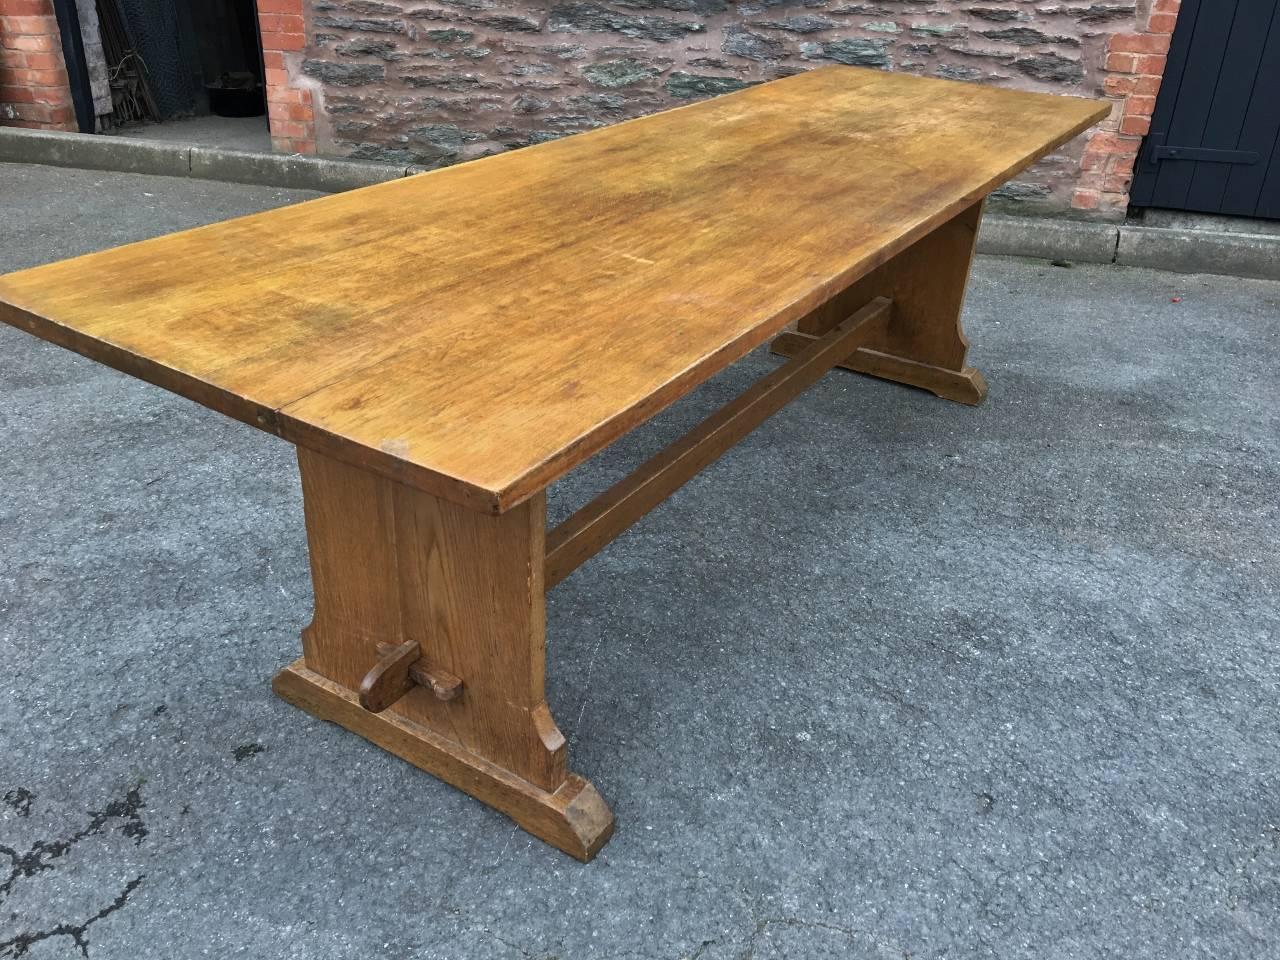 Attractive 1920s oak dining table in excellent condition. Of the Arts and Crafts period, this delightful table is a comfortable eight to ten seater. The top bolts to the base and the base is secured with wooden pegs. Lovely family size table.

The